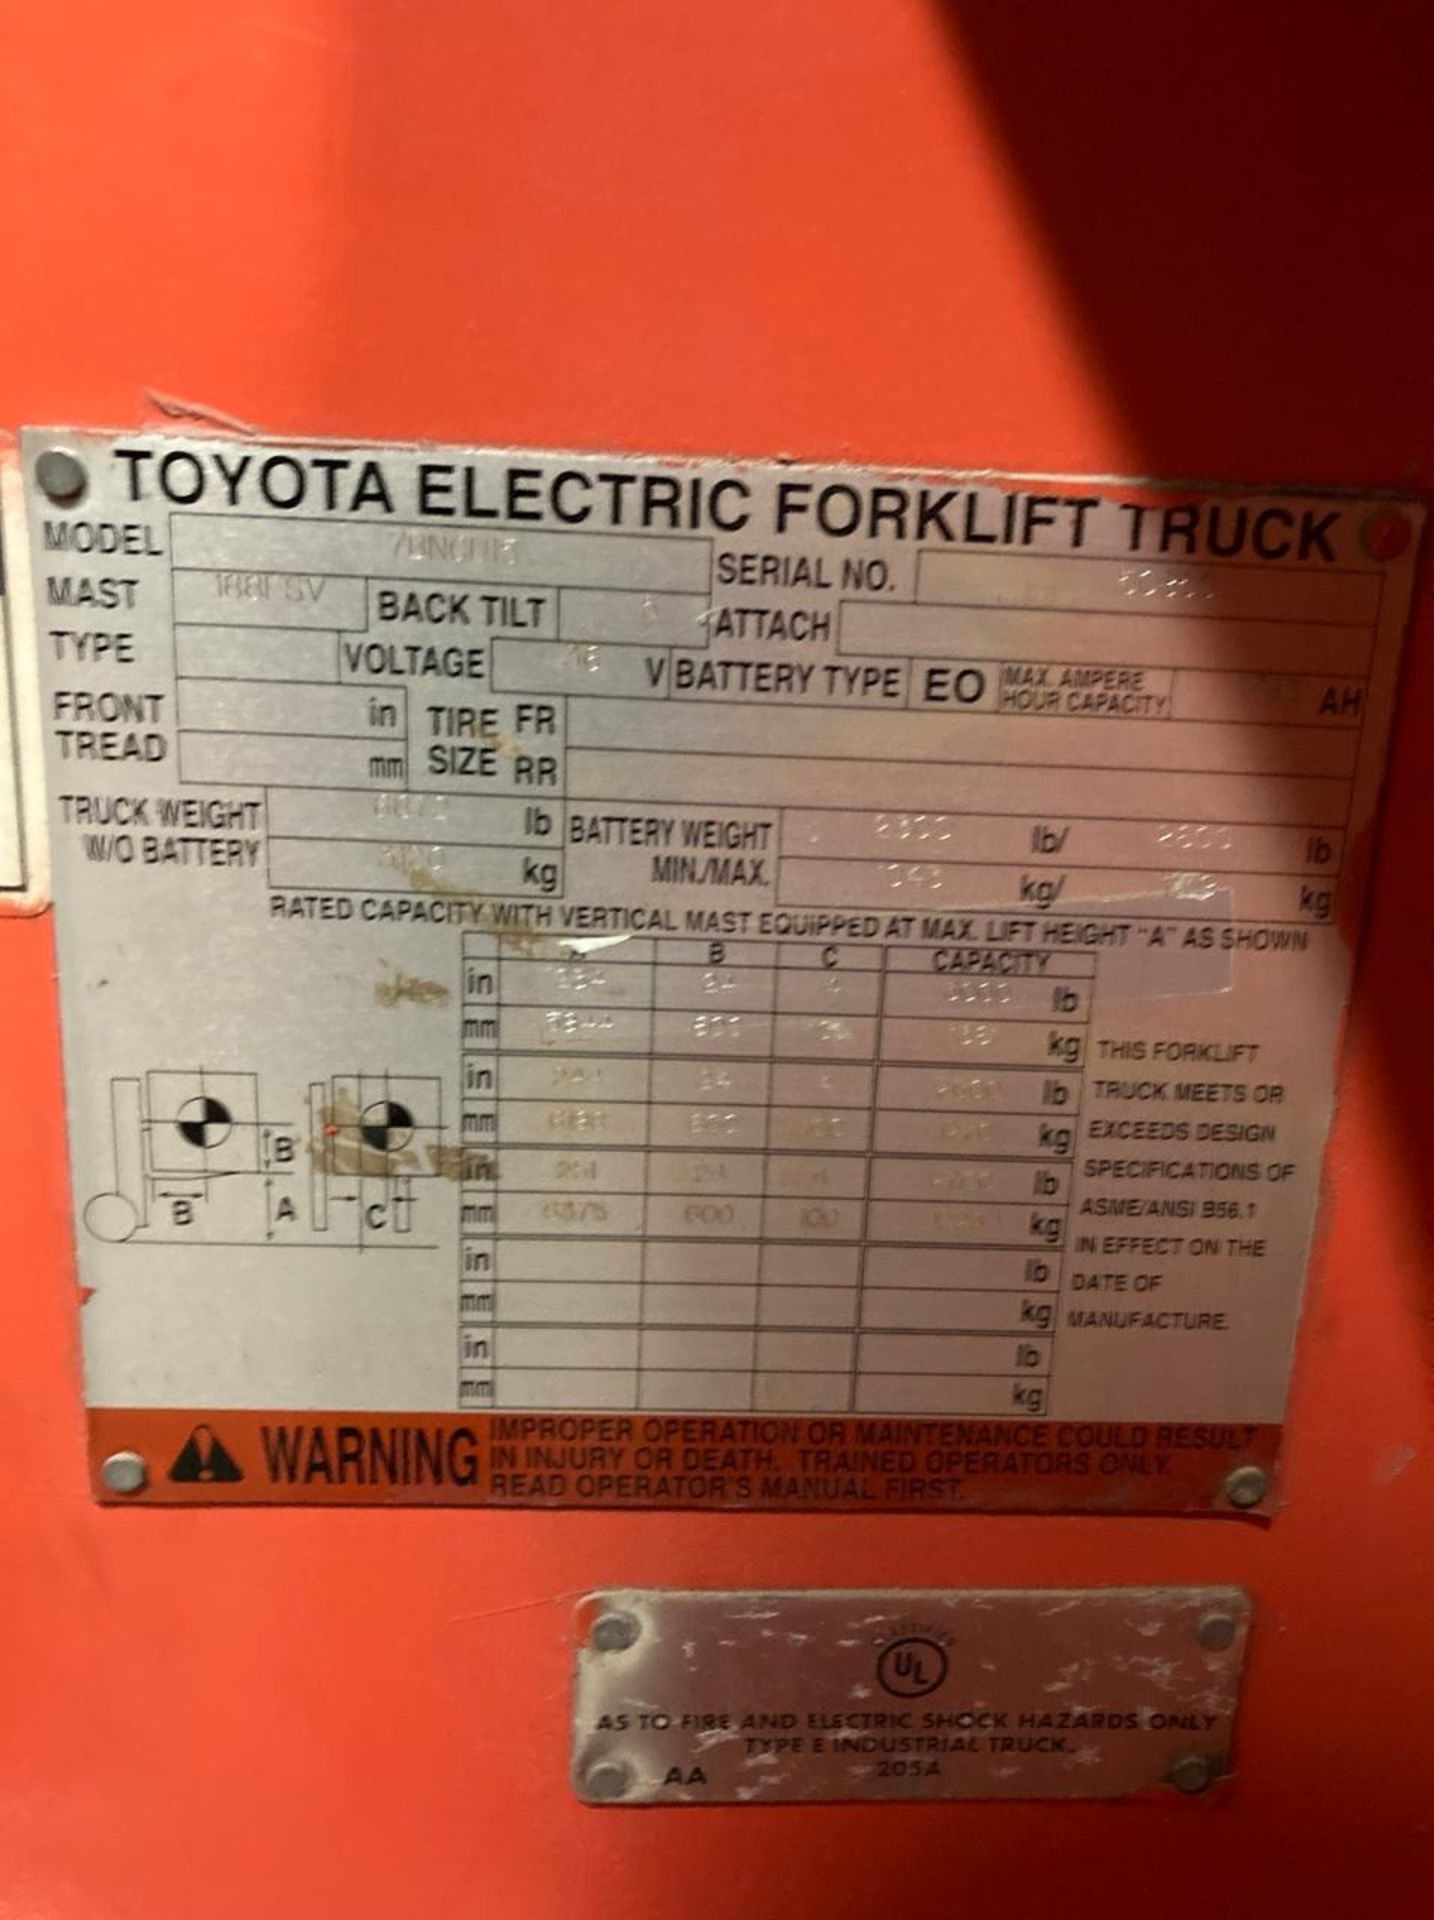 Toyota 7BNCU15 3,000-Lb Capacity Electric Forklift - Image 5 of 6